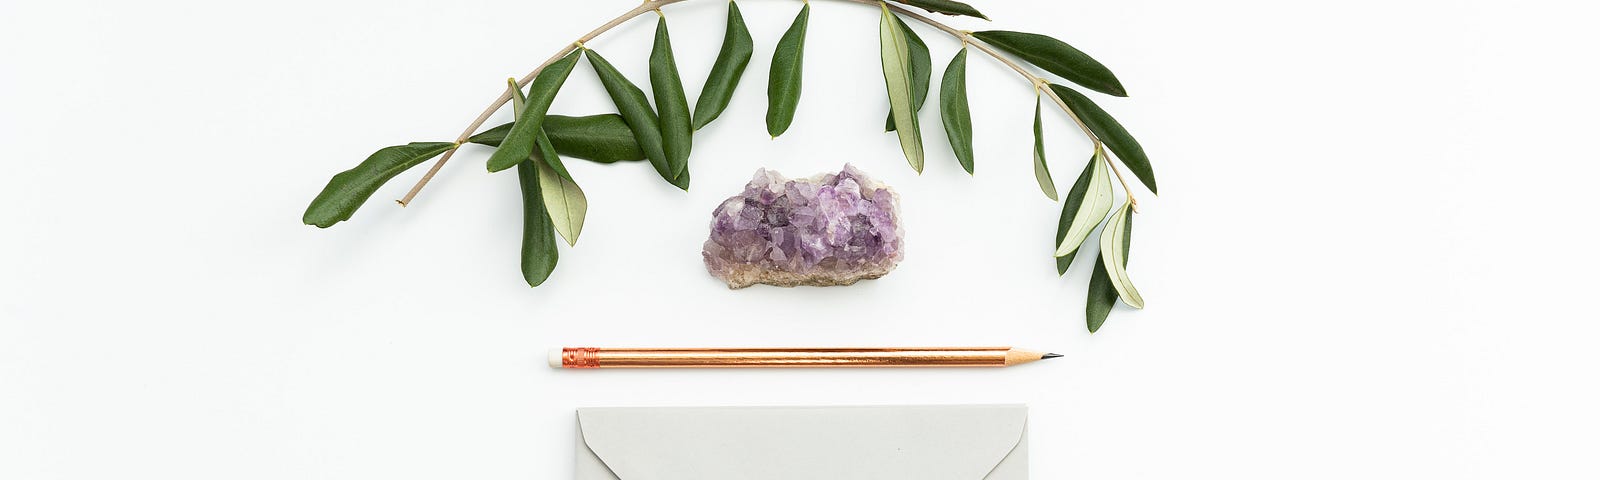 An olive branch, an amethyst stone, a number 2 pencil, and a white envelope.